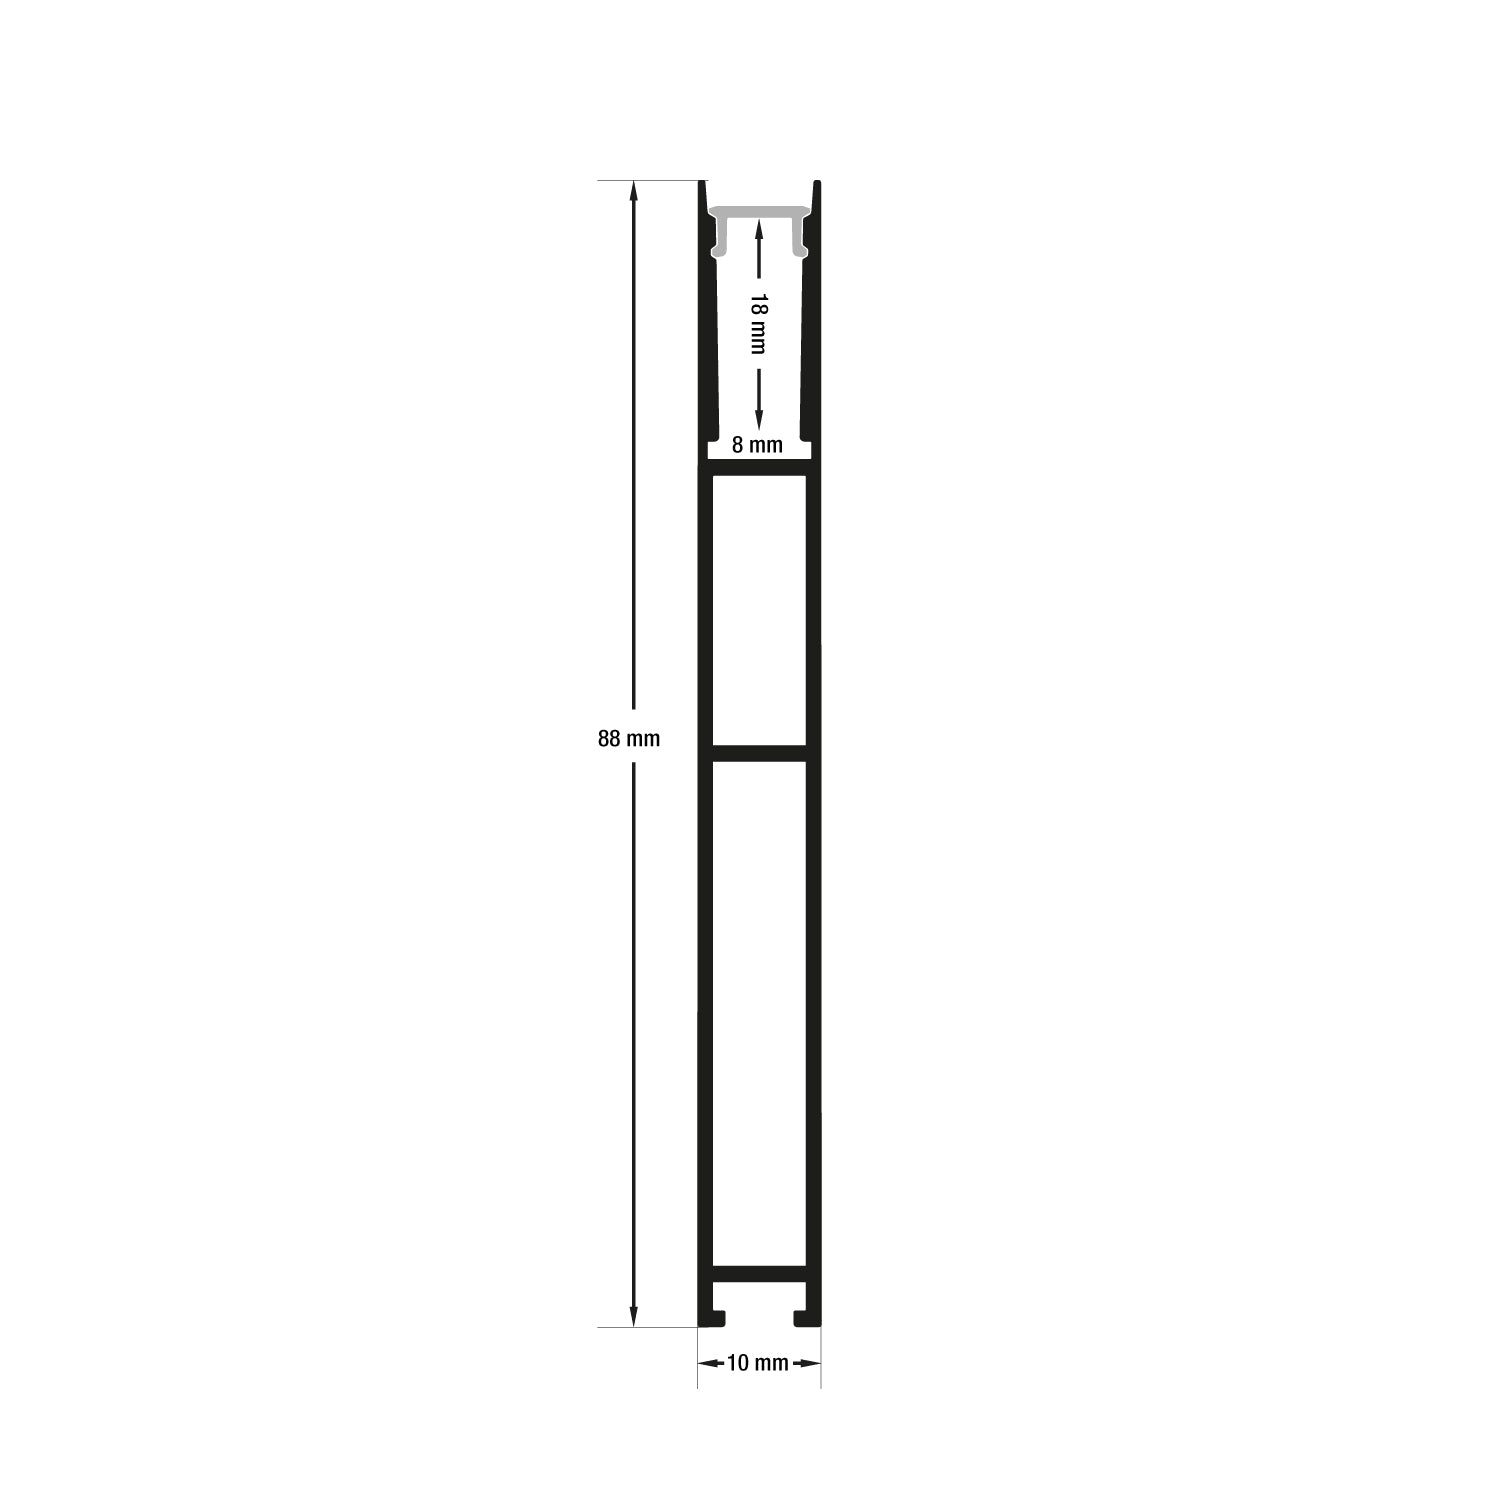 VBD-CH-H2 Narrow Black hanging Aluminum Channel 2.4Meters(94.4in) and 3Meters(118in), Veroboard